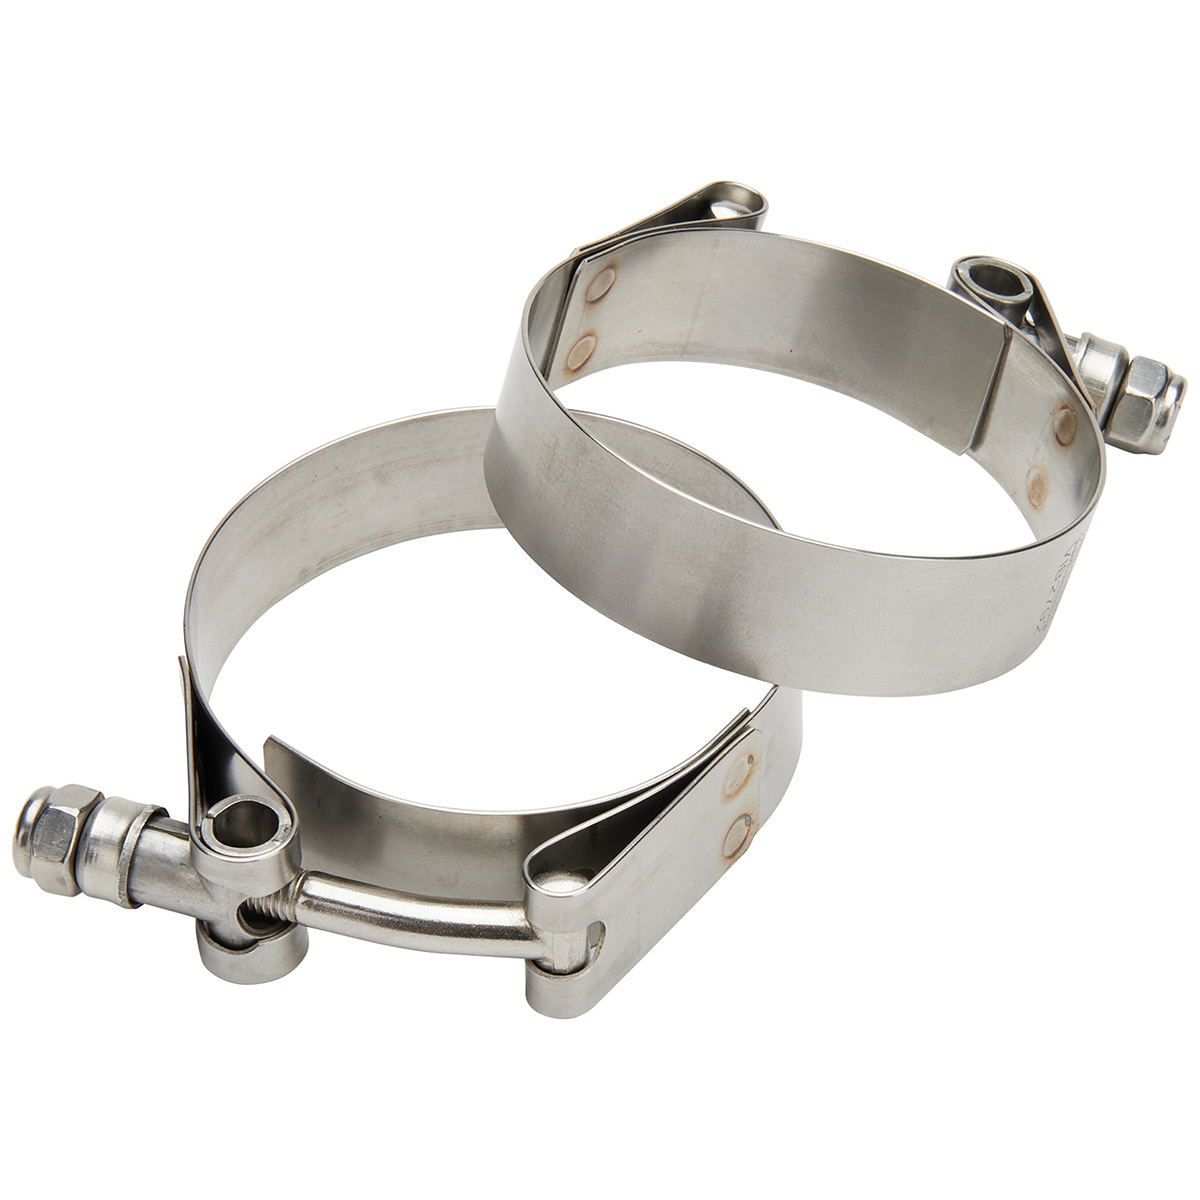 ALLSTAR, Hose Clamp, T-Bolt, 3/4 in Wide, 2-3/8 to 2-3/4 in Range, Stainless, Na